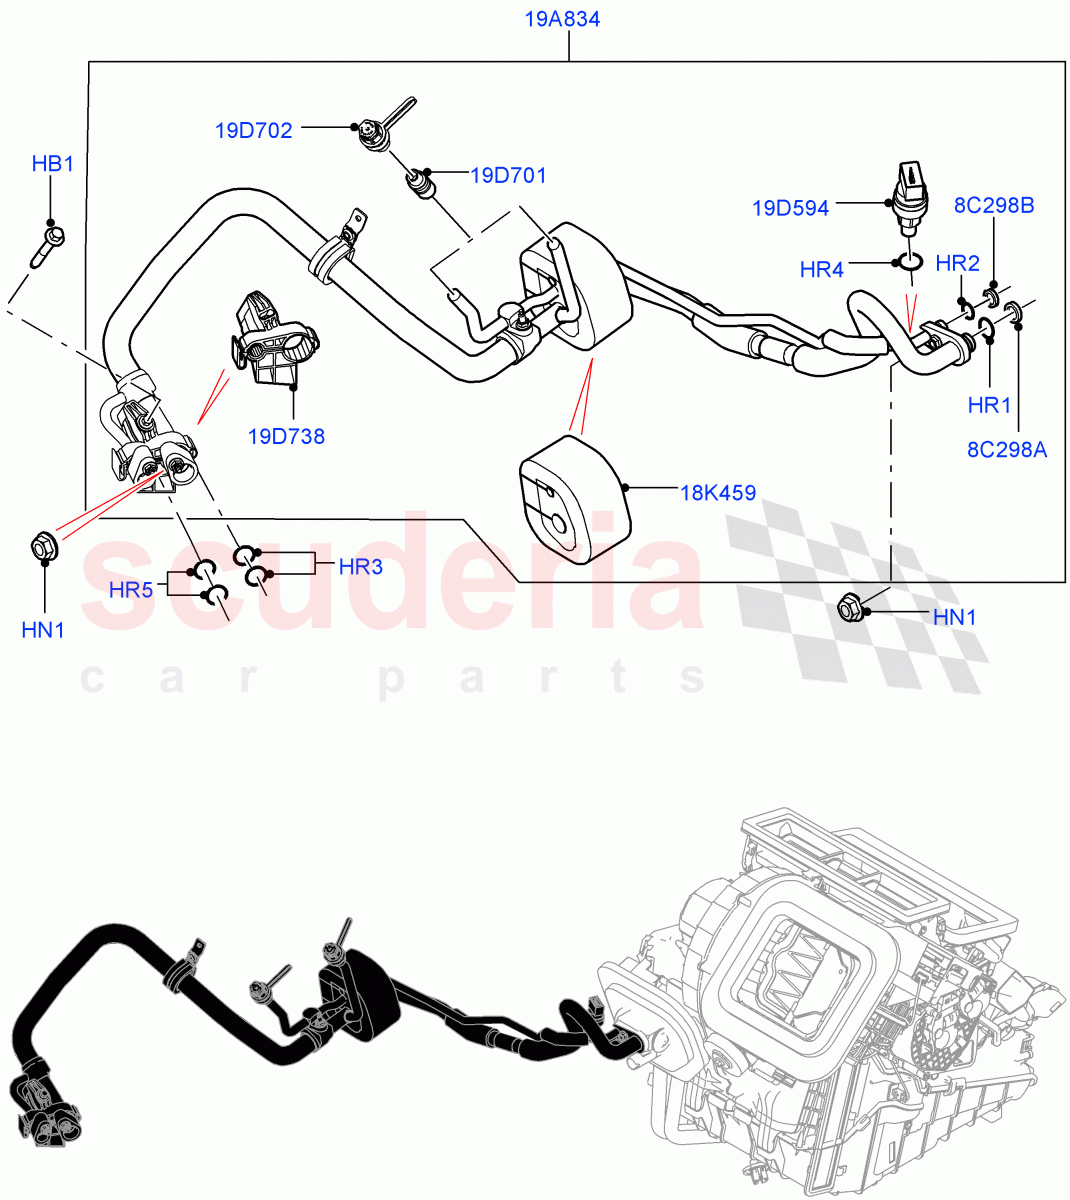 Air Conditioning System(Halewood (UK),Less Chiller Unit,Air Con Refrigerant-HF01234YF)((V)TOFH999999) of Land Rover Land Rover Discovery Sport (2015+) [2.0 Turbo Petrol AJ200P]